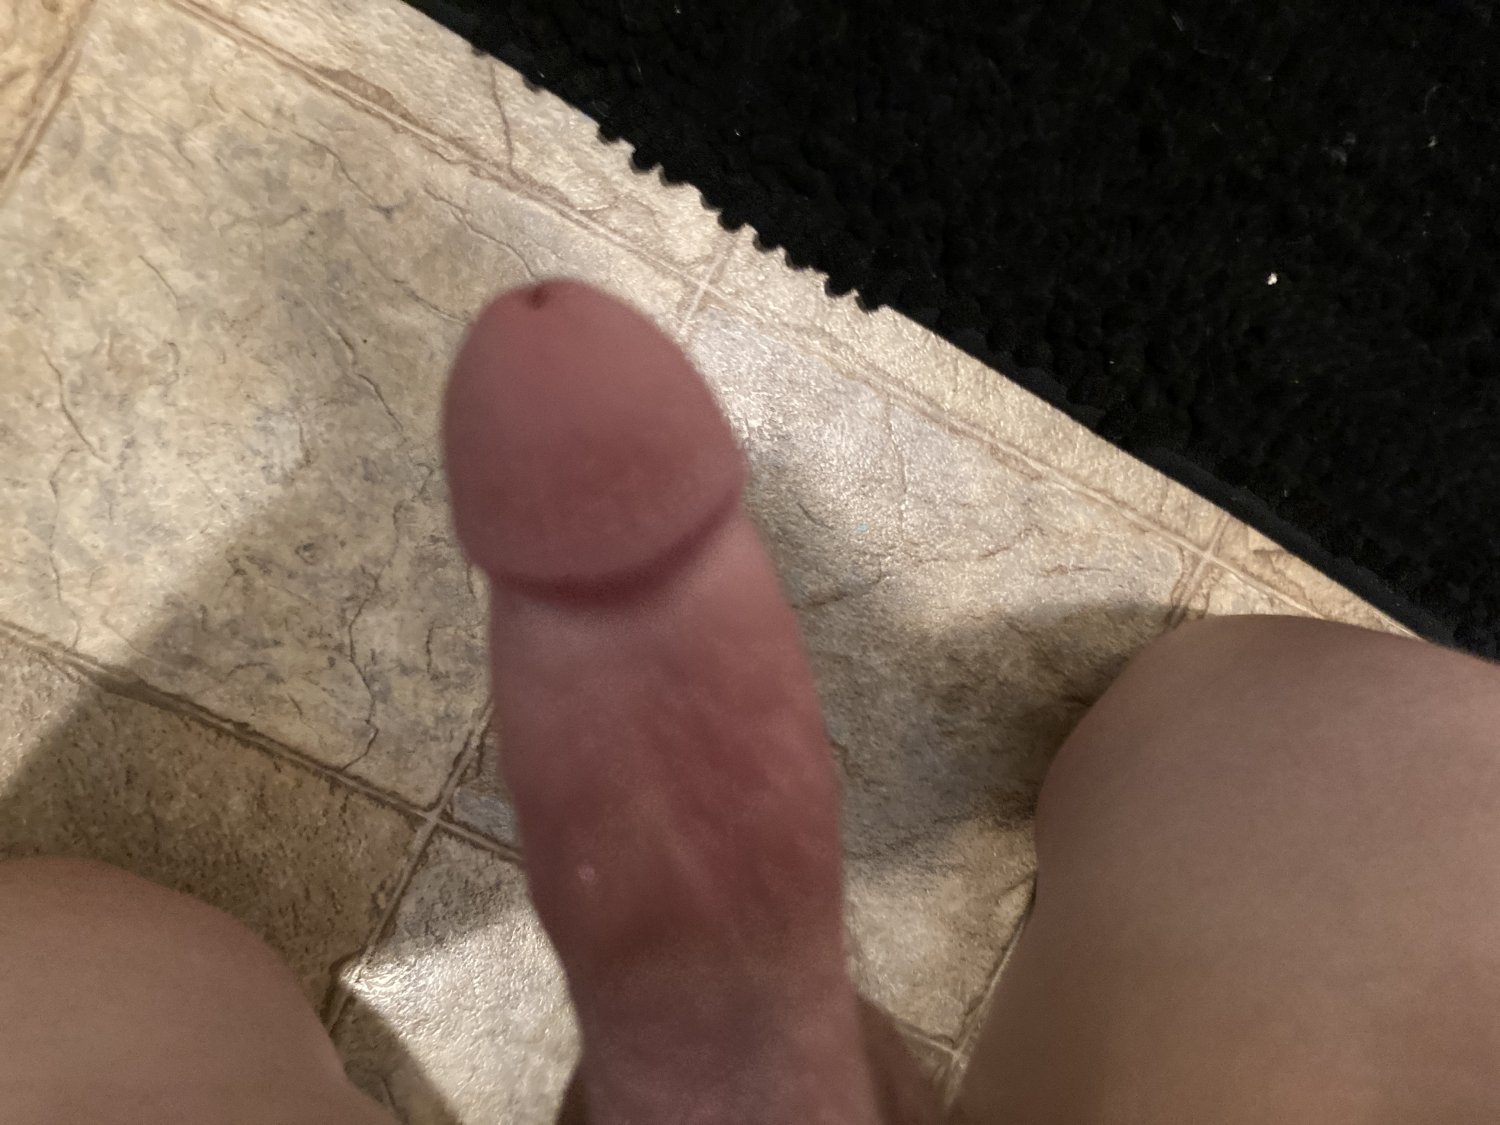 Short Penis - Me and my small penis but size don't matter - Porn - EroMe